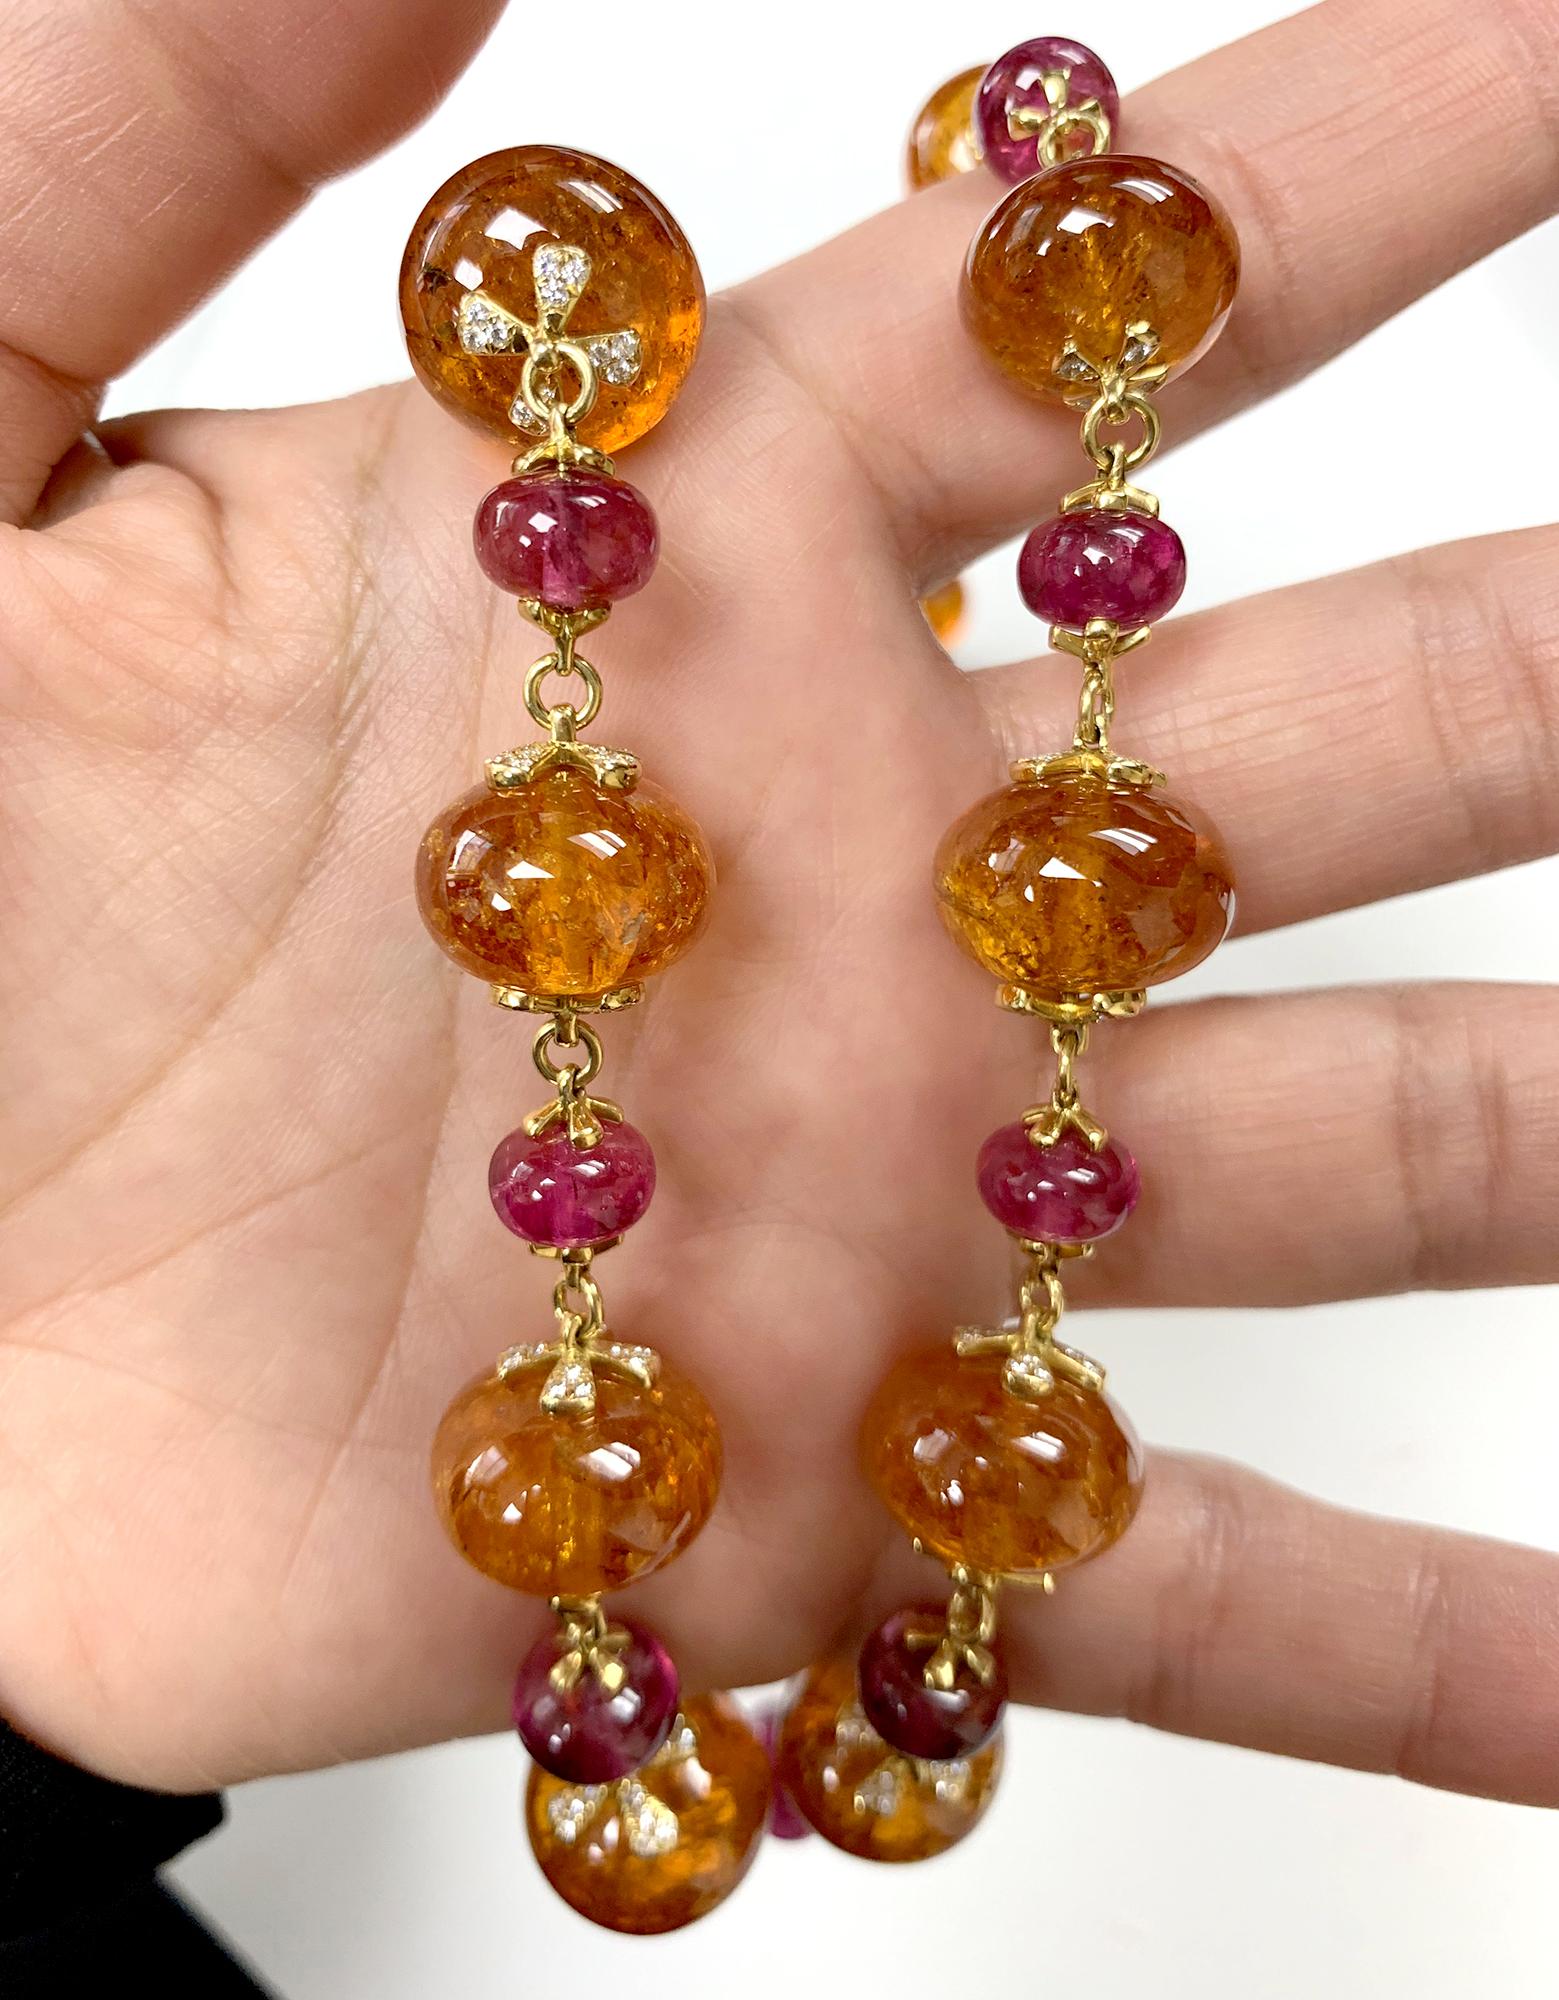 This Mandarin Garnet Plain Beads with Tourmaline Beads Necklace in 18K Yellow Gold is a stunning piece of jewelry from the 'G-One' Collection. This necklace features beautiful orange mandarin garnet beads and pink tourmaline beads, all of which are